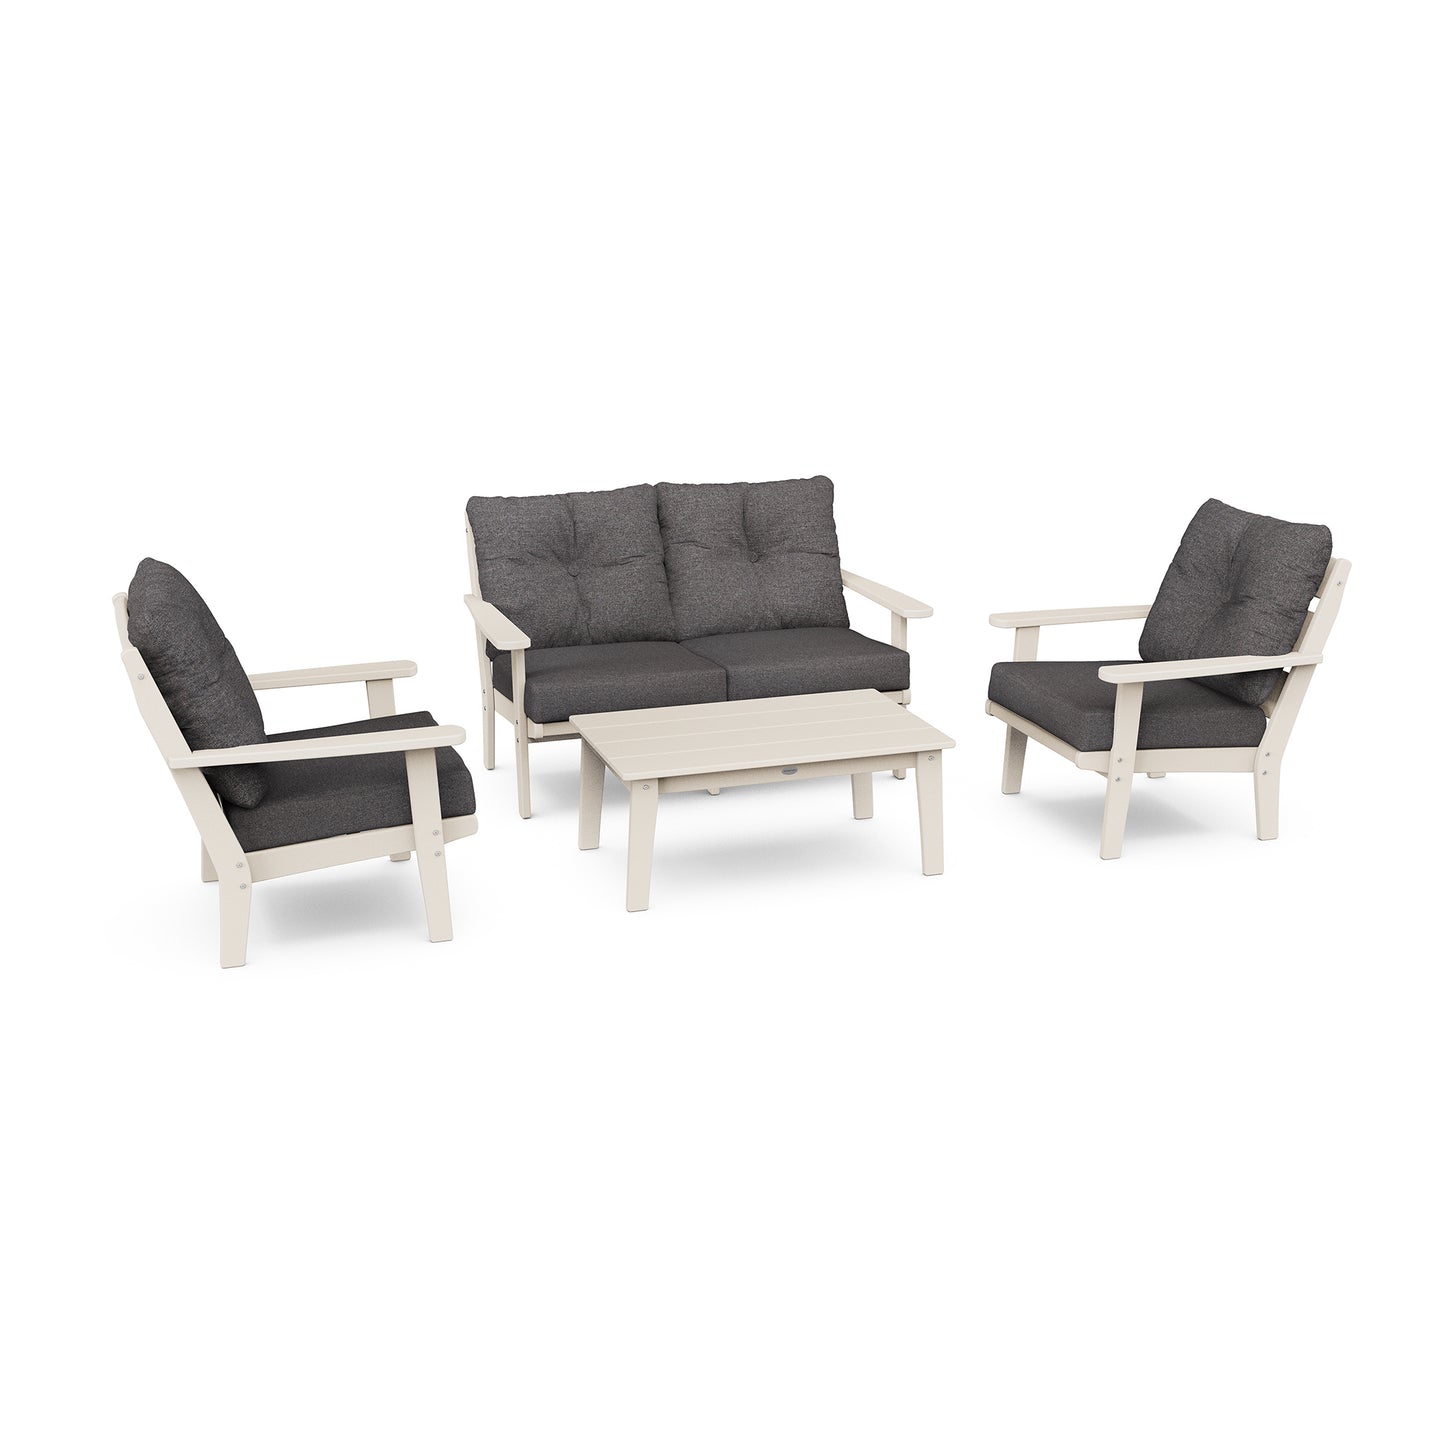 A modern all-weather outdoor seating set comprising two POLYWOOD Lakeside armchairs, a POLYWOOD Lakeside loveseat, and a POLYWOOD Lakeside coffee table, all in white and gray, displayed against a white background.